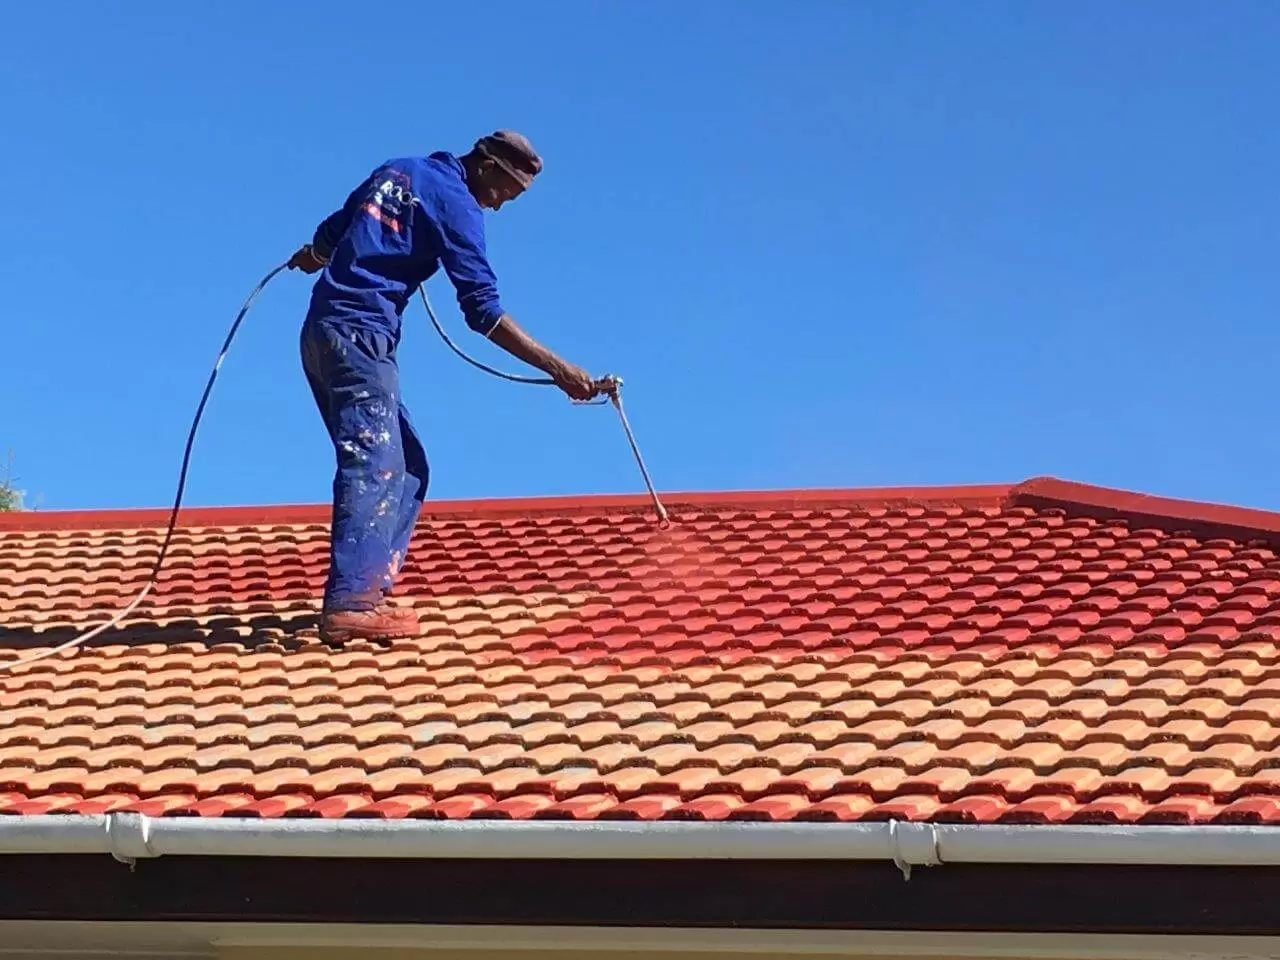 The Roofing Specialist